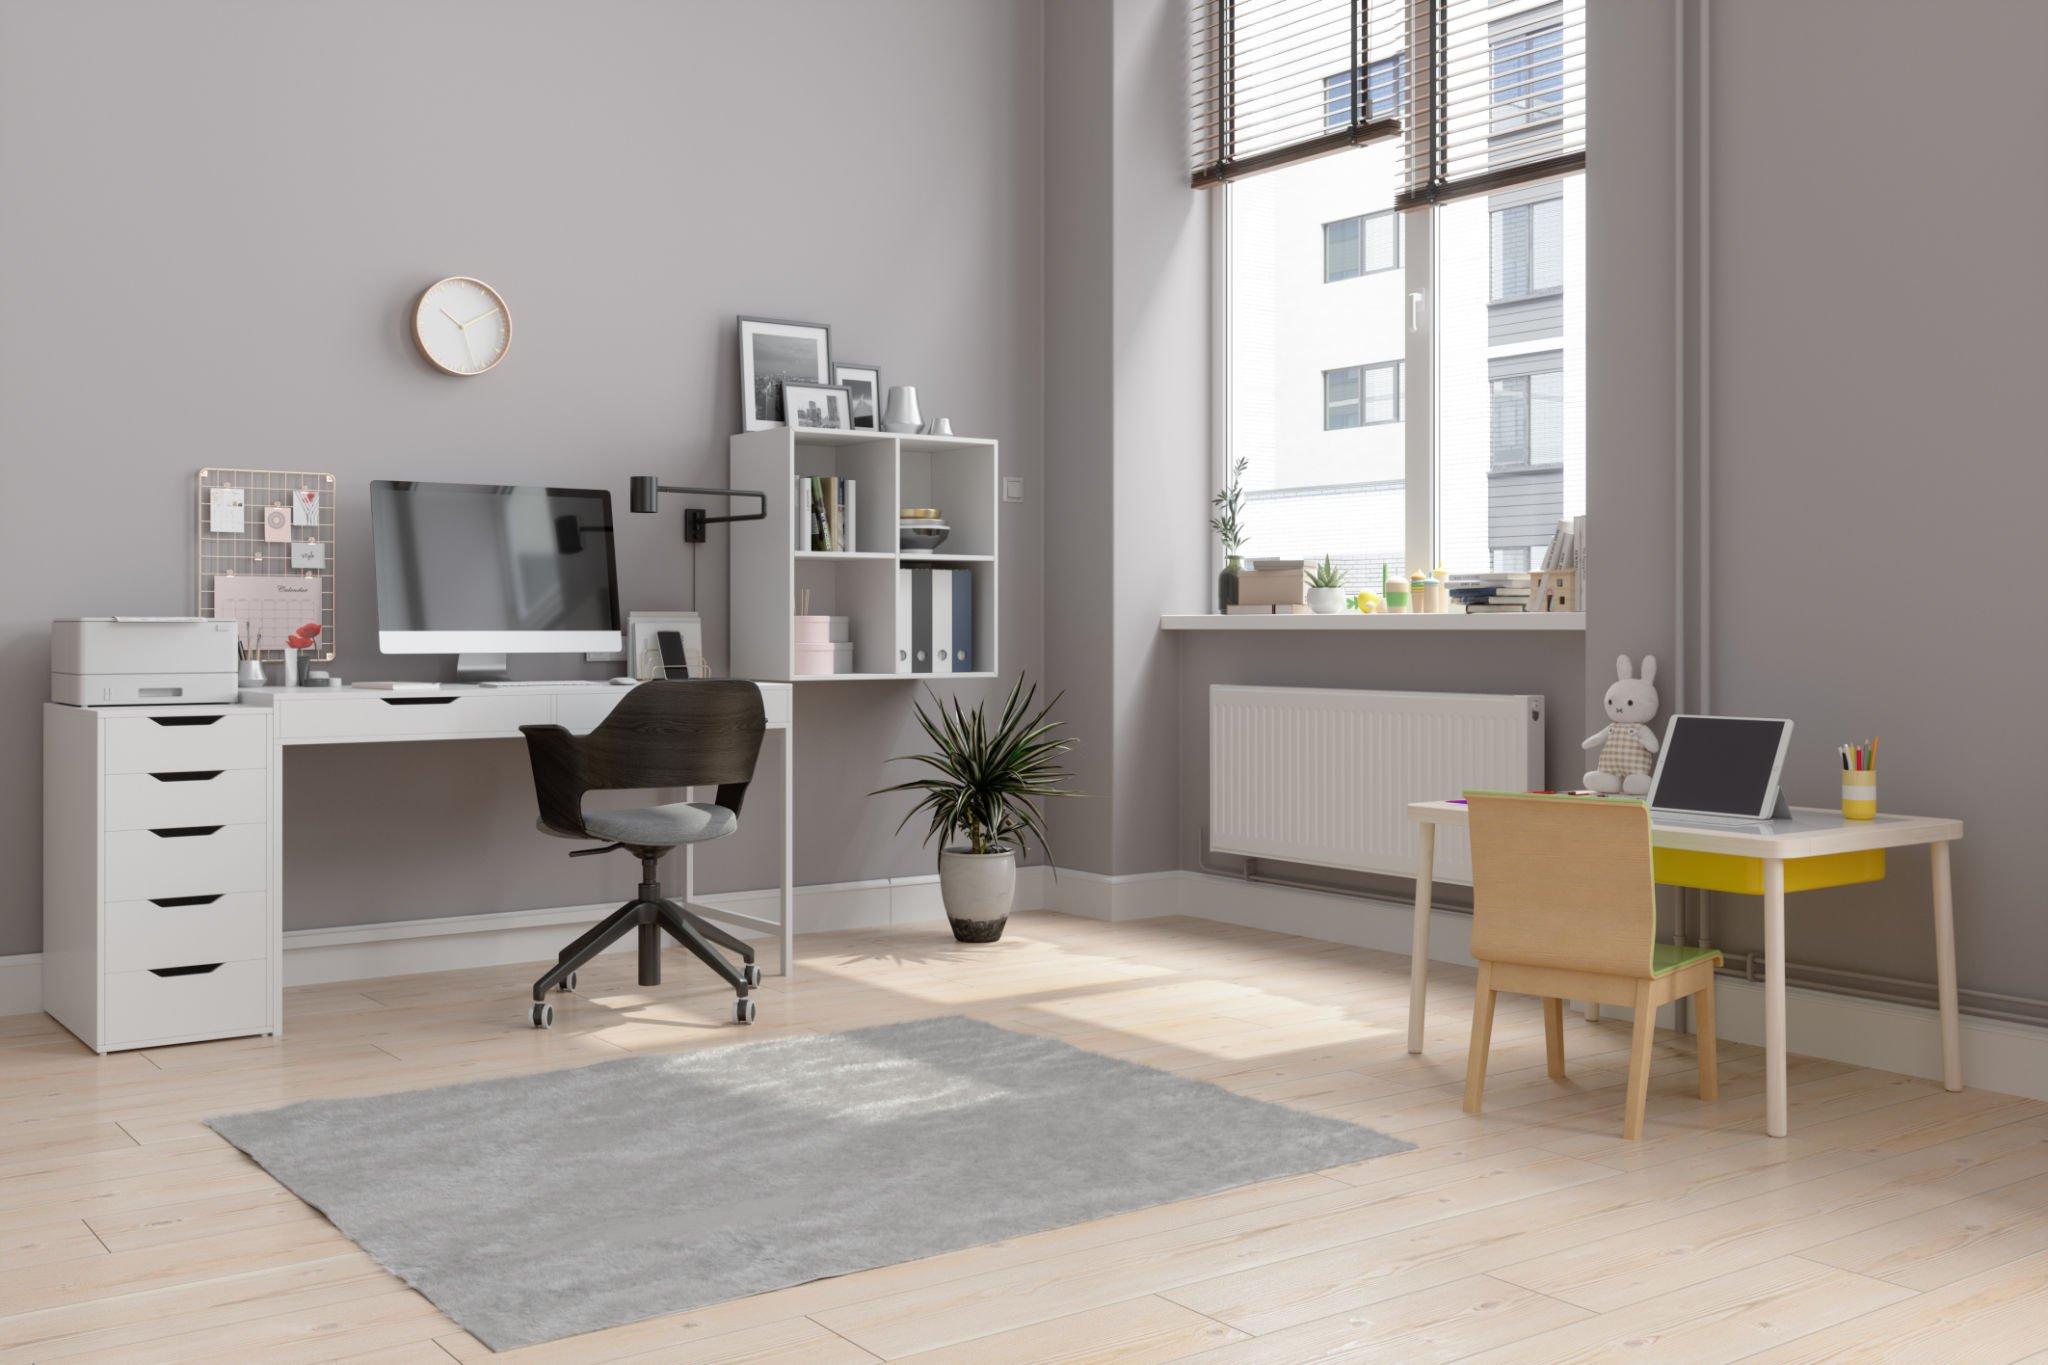 How to Create a Comfortable Space to Work Efficiently at Home